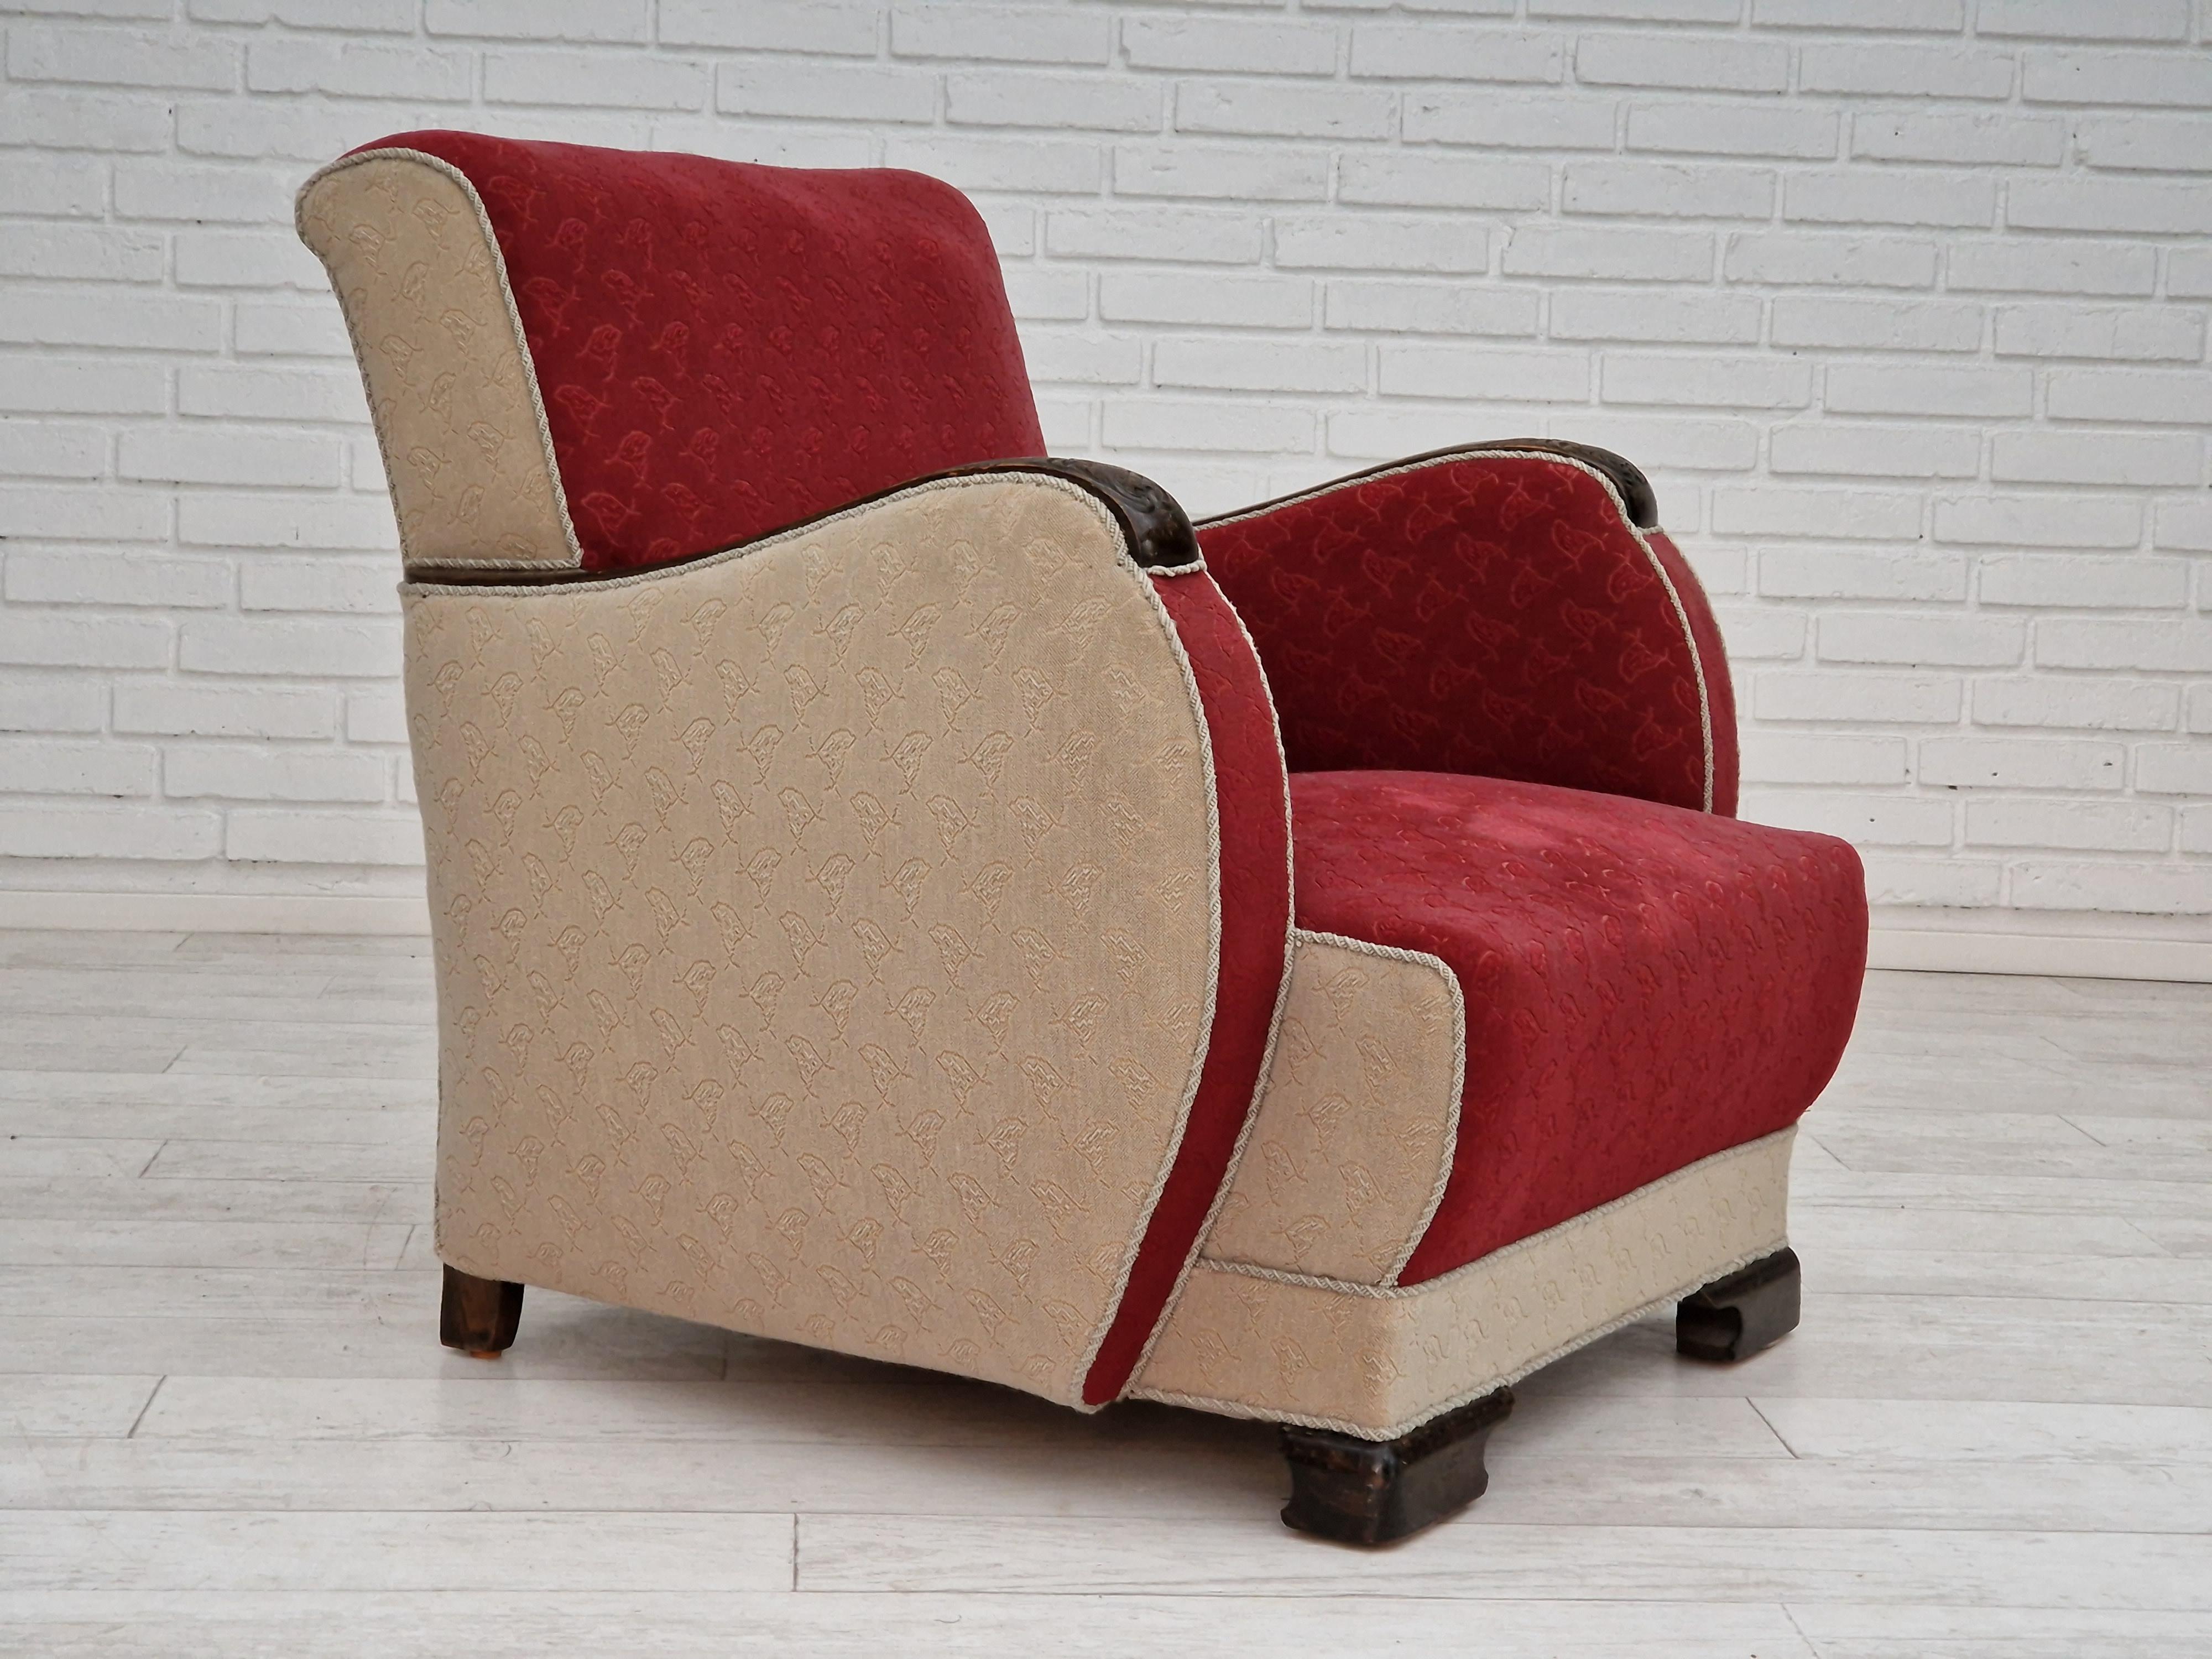 1950s, Scandinavian Art Deco Chairs, Original Condition In Good Condition For Sale In Tarm, 82